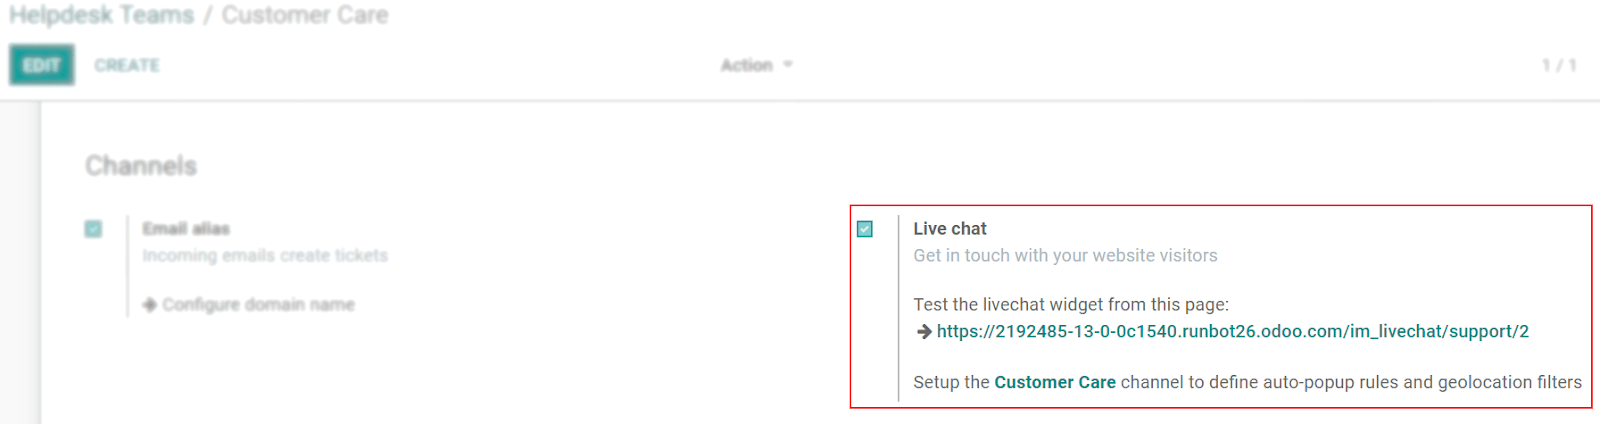 View of the settings page of a helpdesk team emphasizing the live chat features and links in Odoo Helpdesk